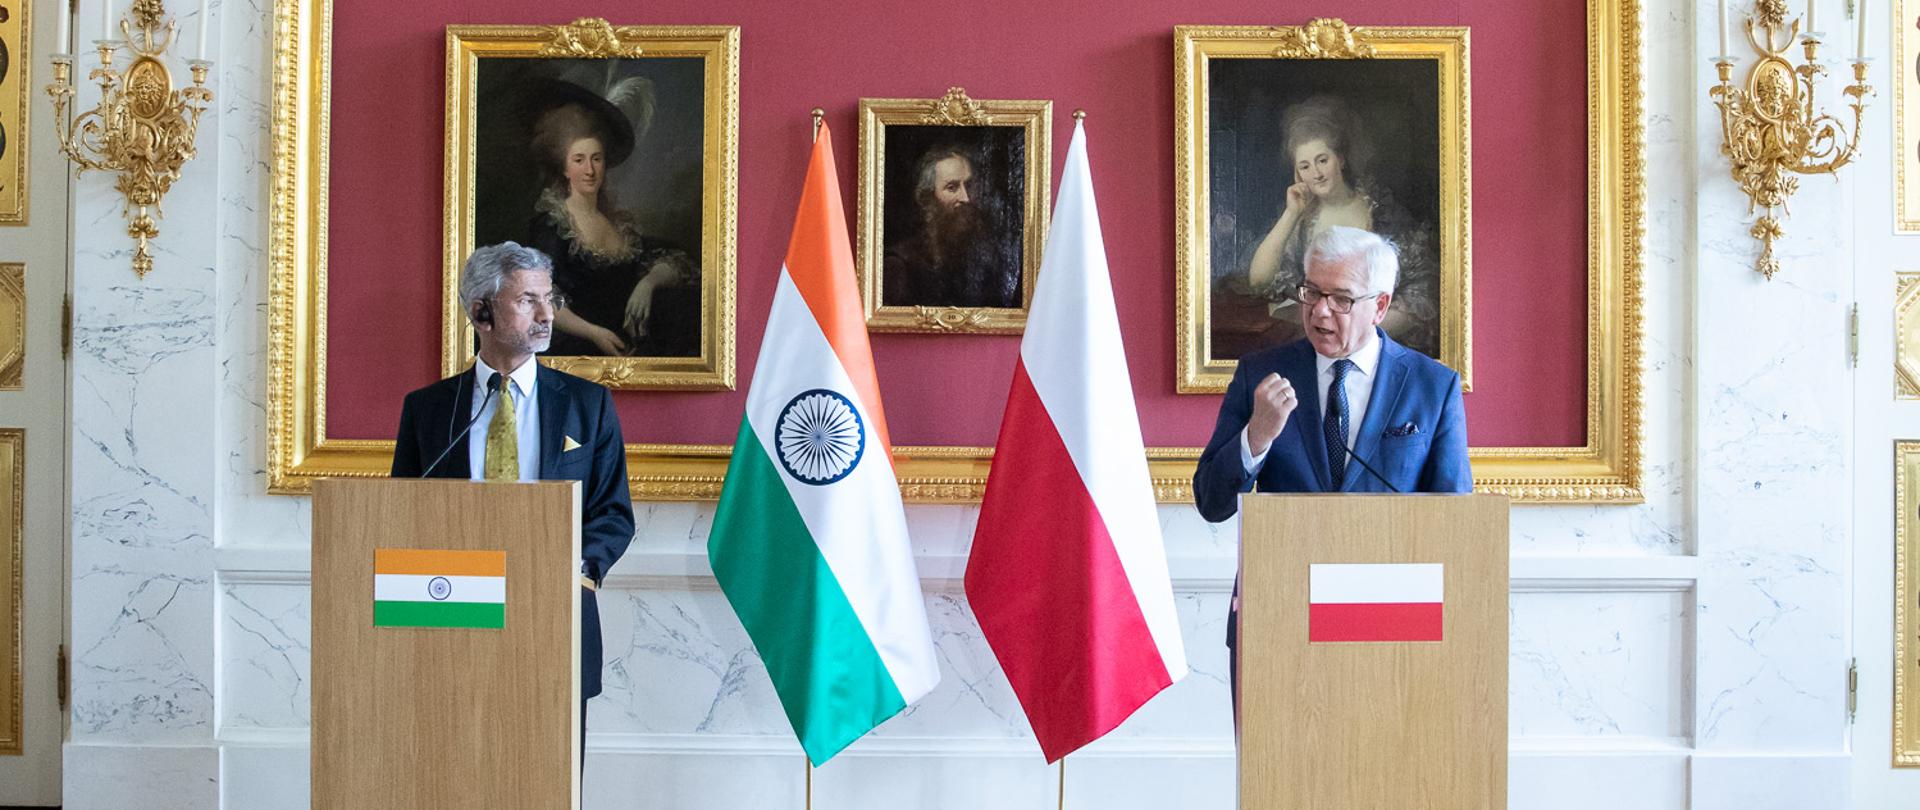 India’s foreign minister visits Poland for the first time in 32 years